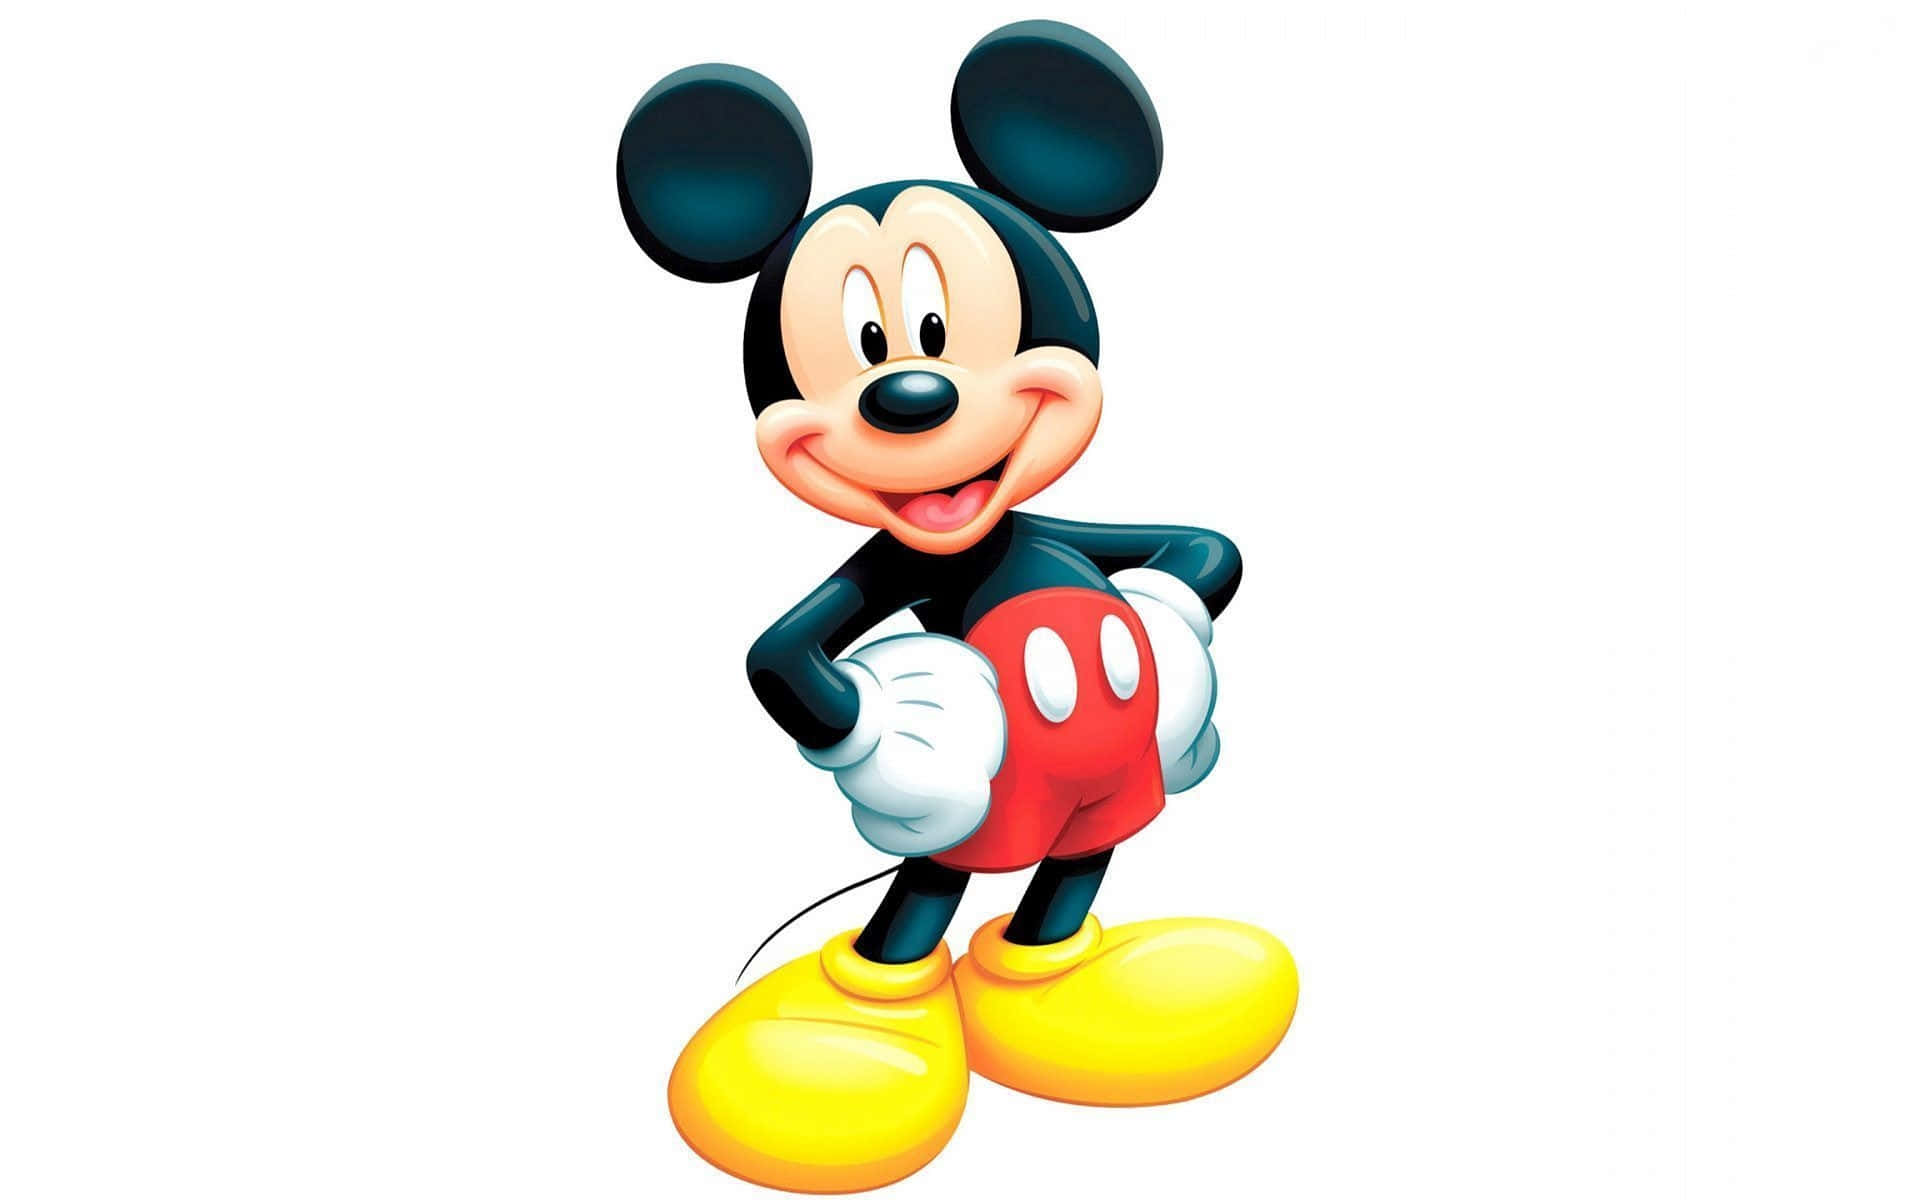 A Picture Of An Adorable Mickey Mouse In A Playful Pose.